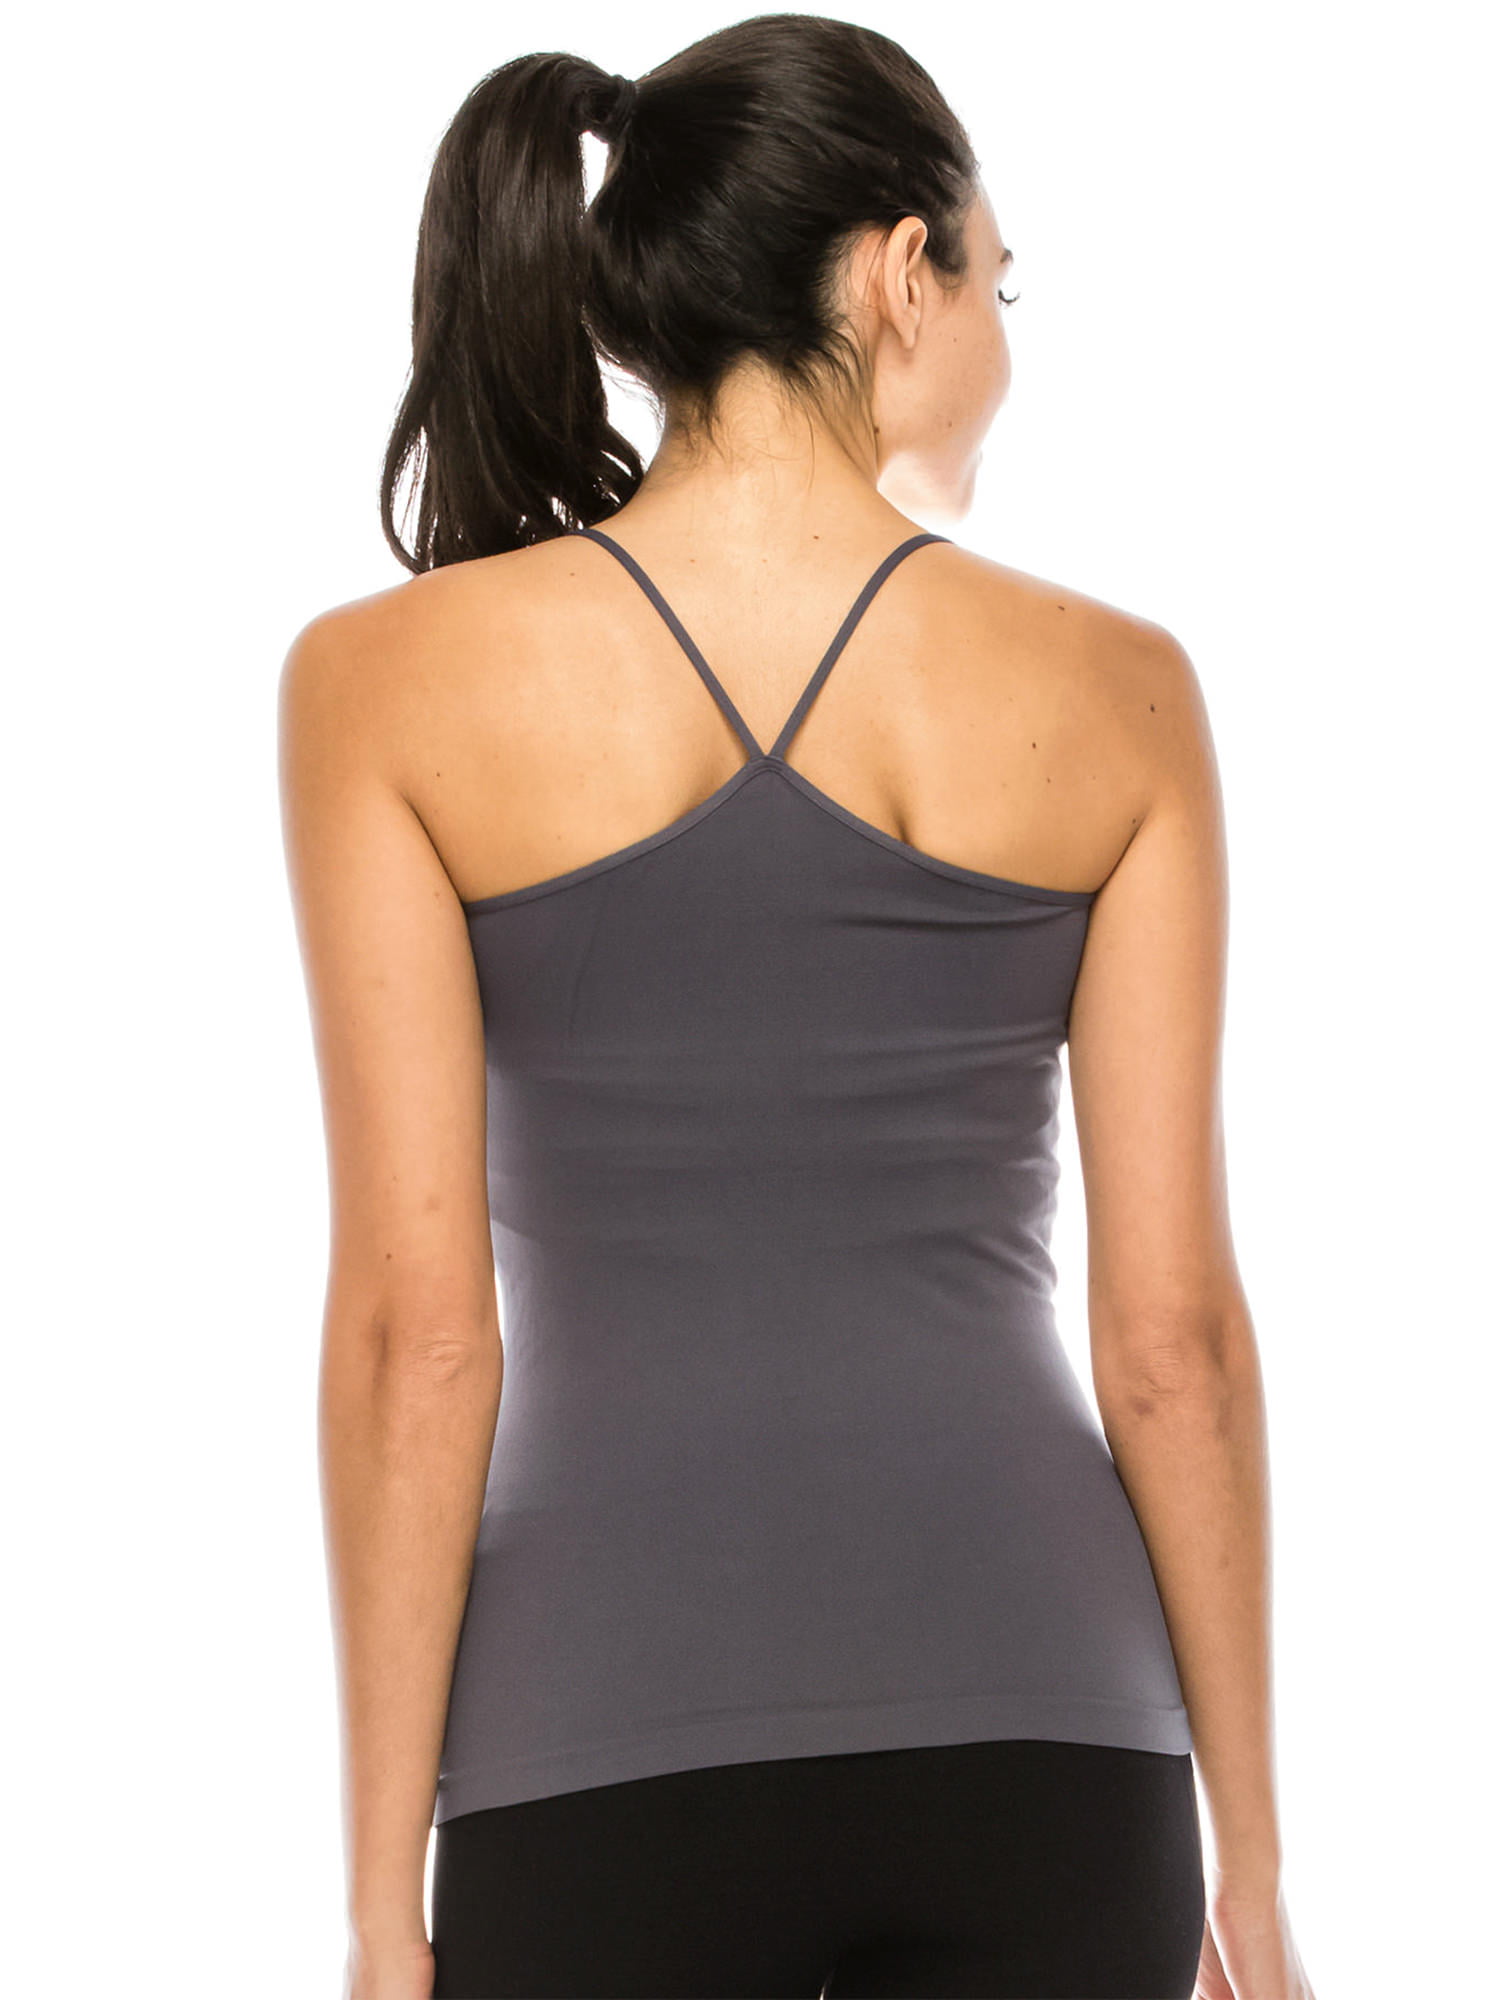 UV Protective Fabric UPF 50+ Made with Love in The USA Kurve American Made V Neck Spaghetti Strap Basic Cami